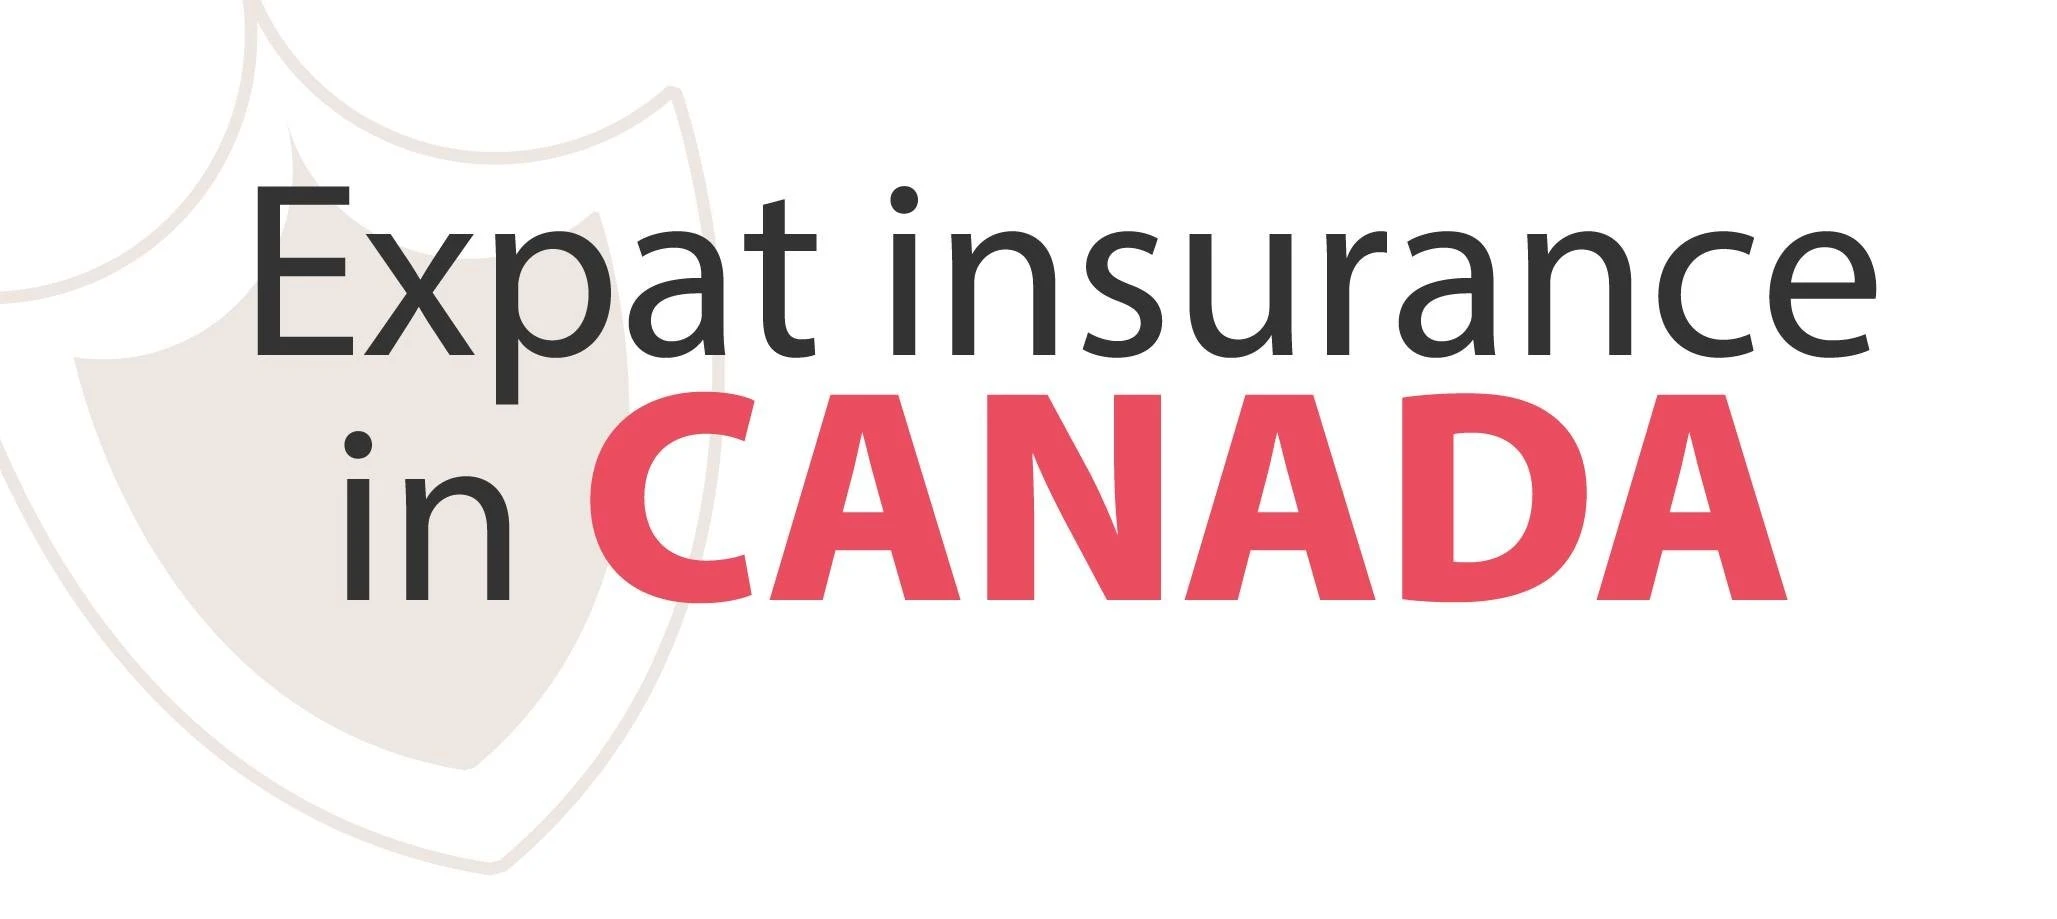 Expat Insurance Canada: What Foreigners Need to Know